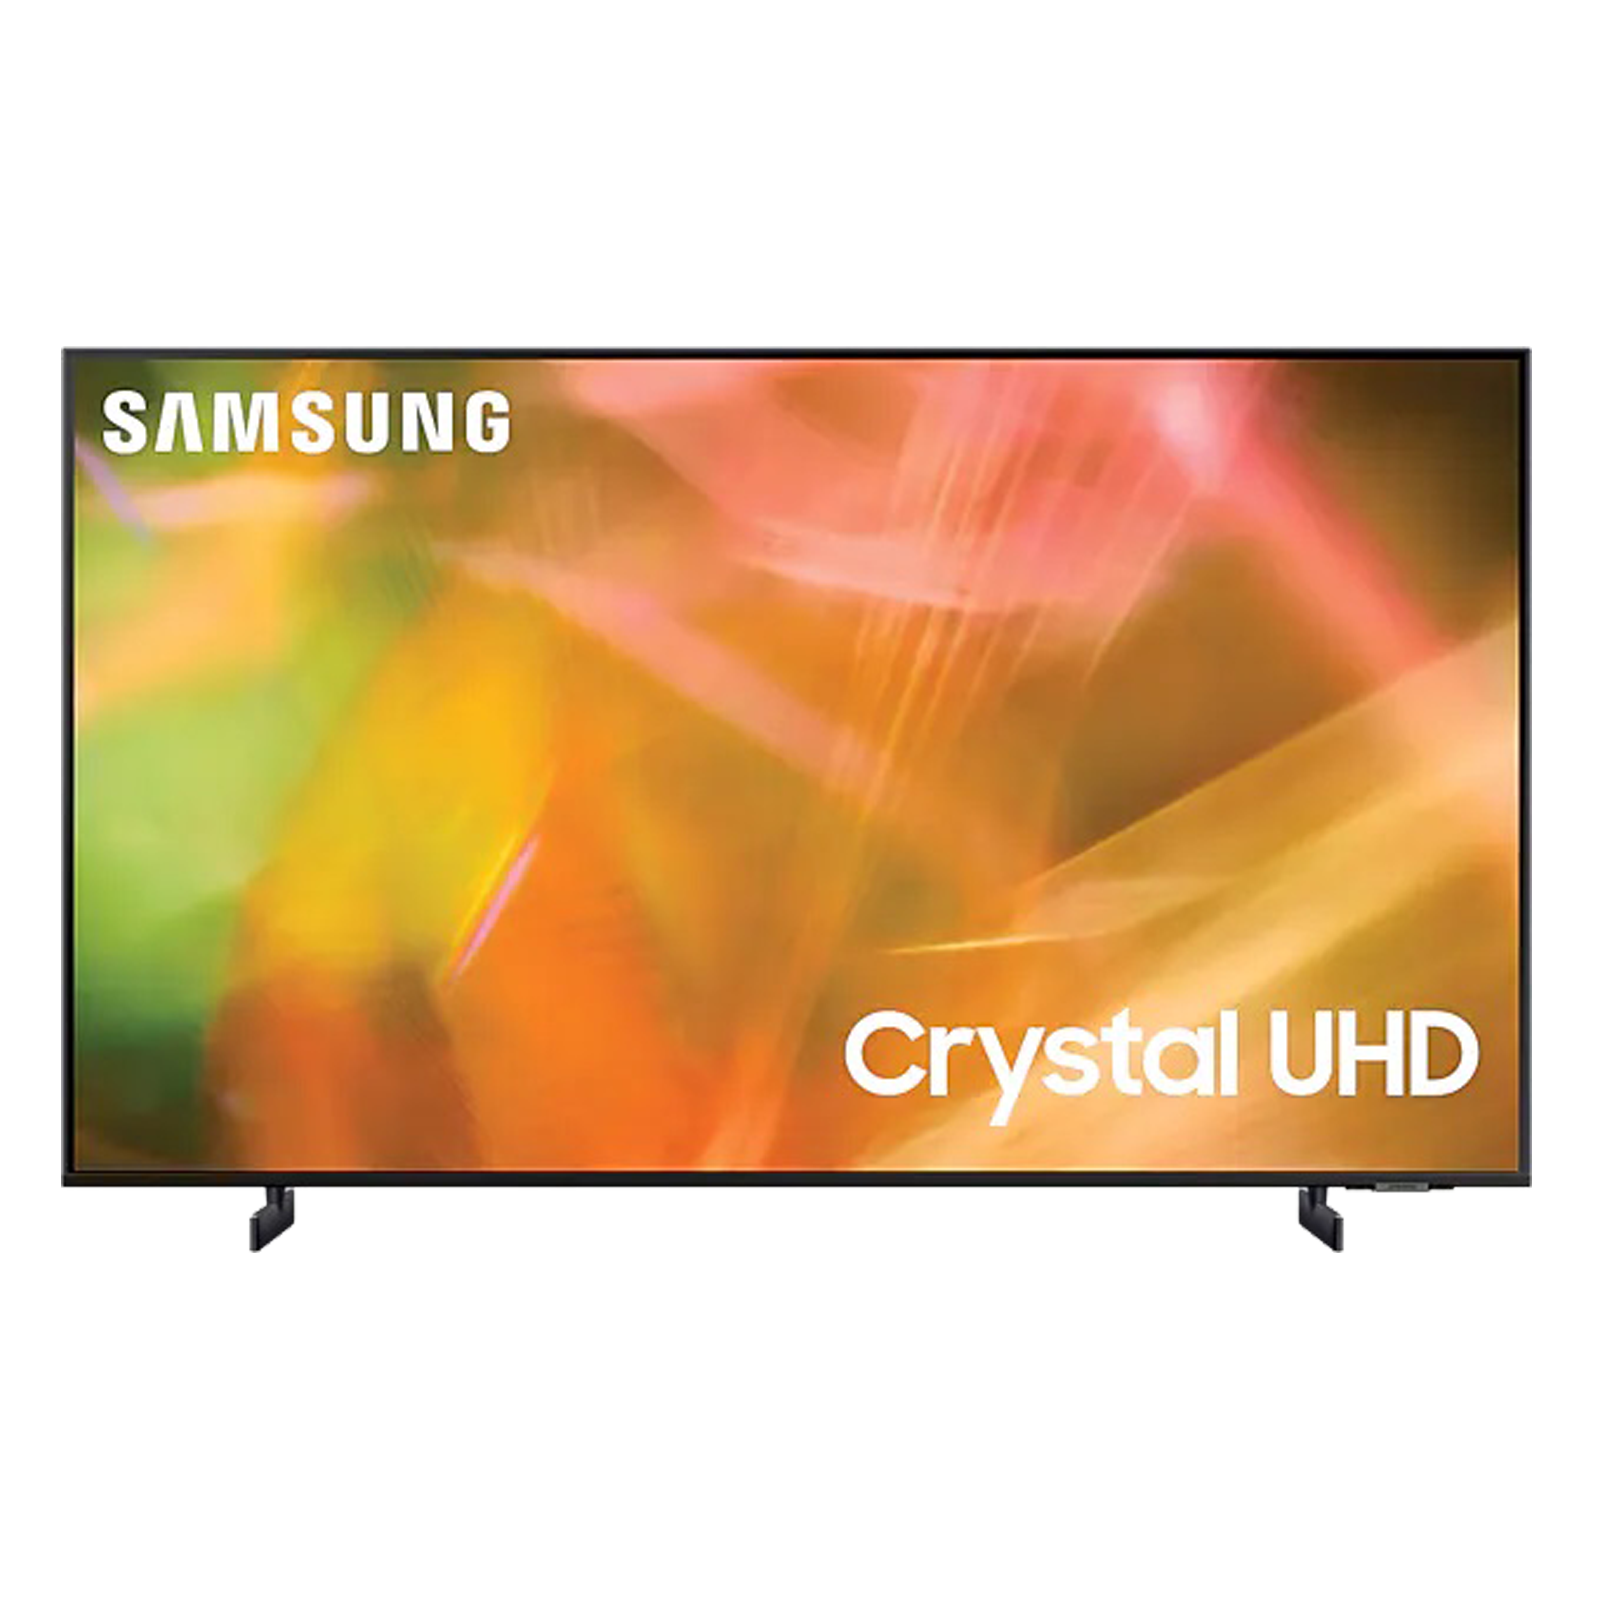 Croma Retail - Samsung 8 Series 189cm (75 Inch) Ultra HD 4K LED Smart TV (Multi Voice Assistant Supported, UA75AU8200KLXL, Titan Grey)